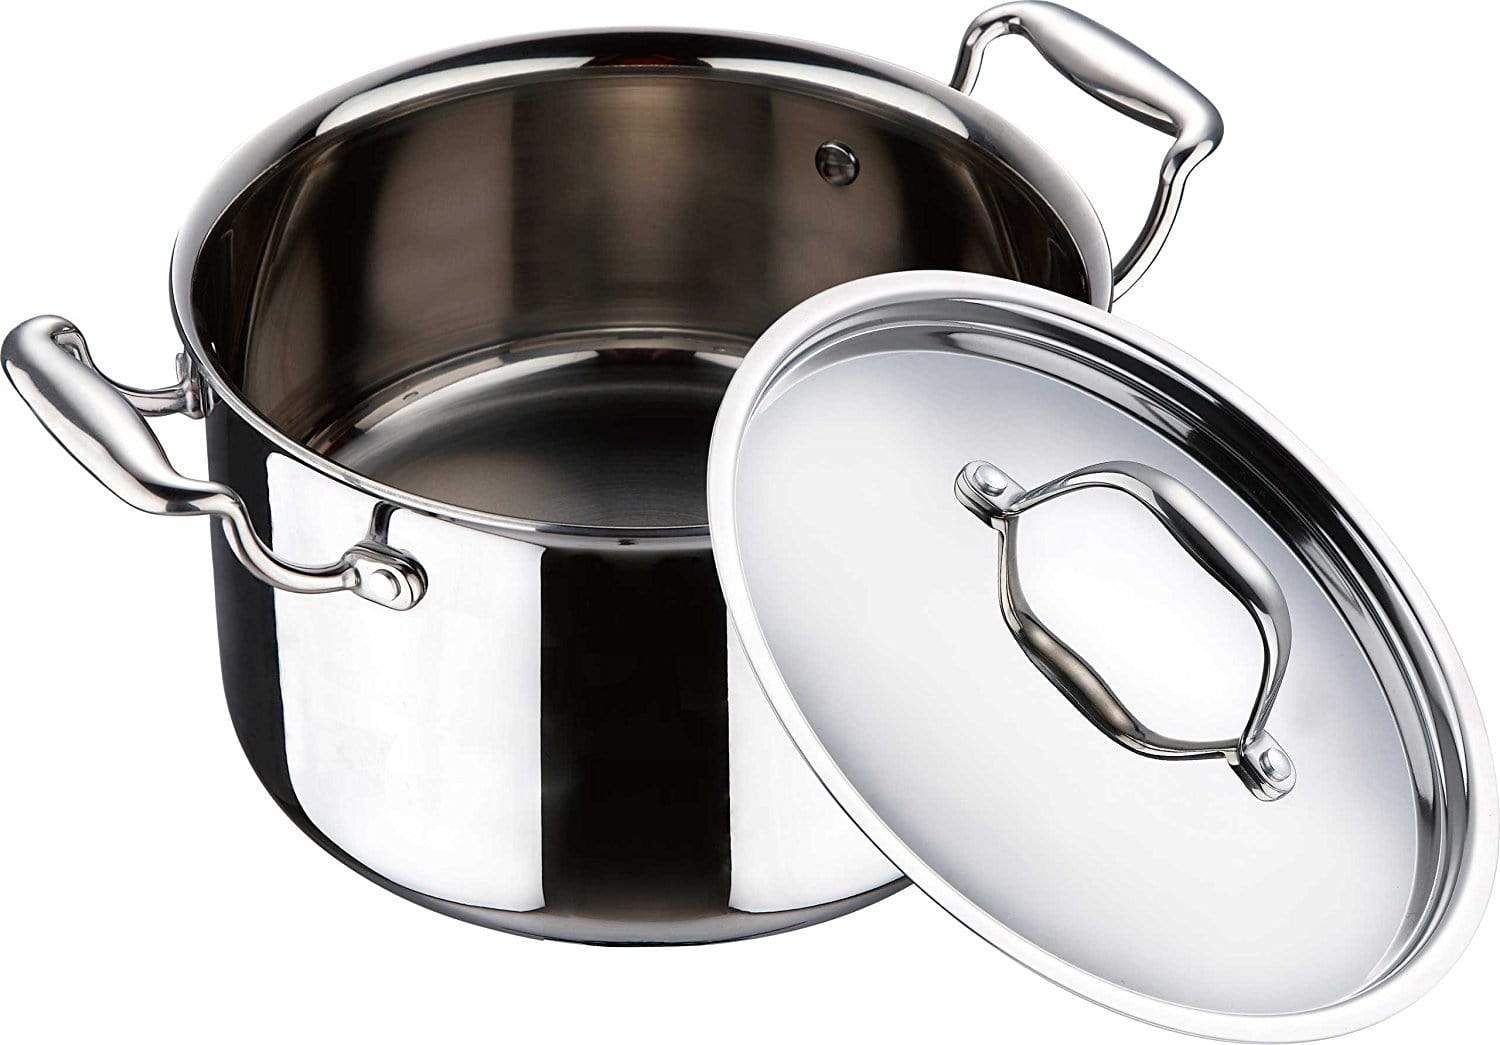 Bergner Argent Triply Stainless Steel Casserole with Lid - KITCHEN MART